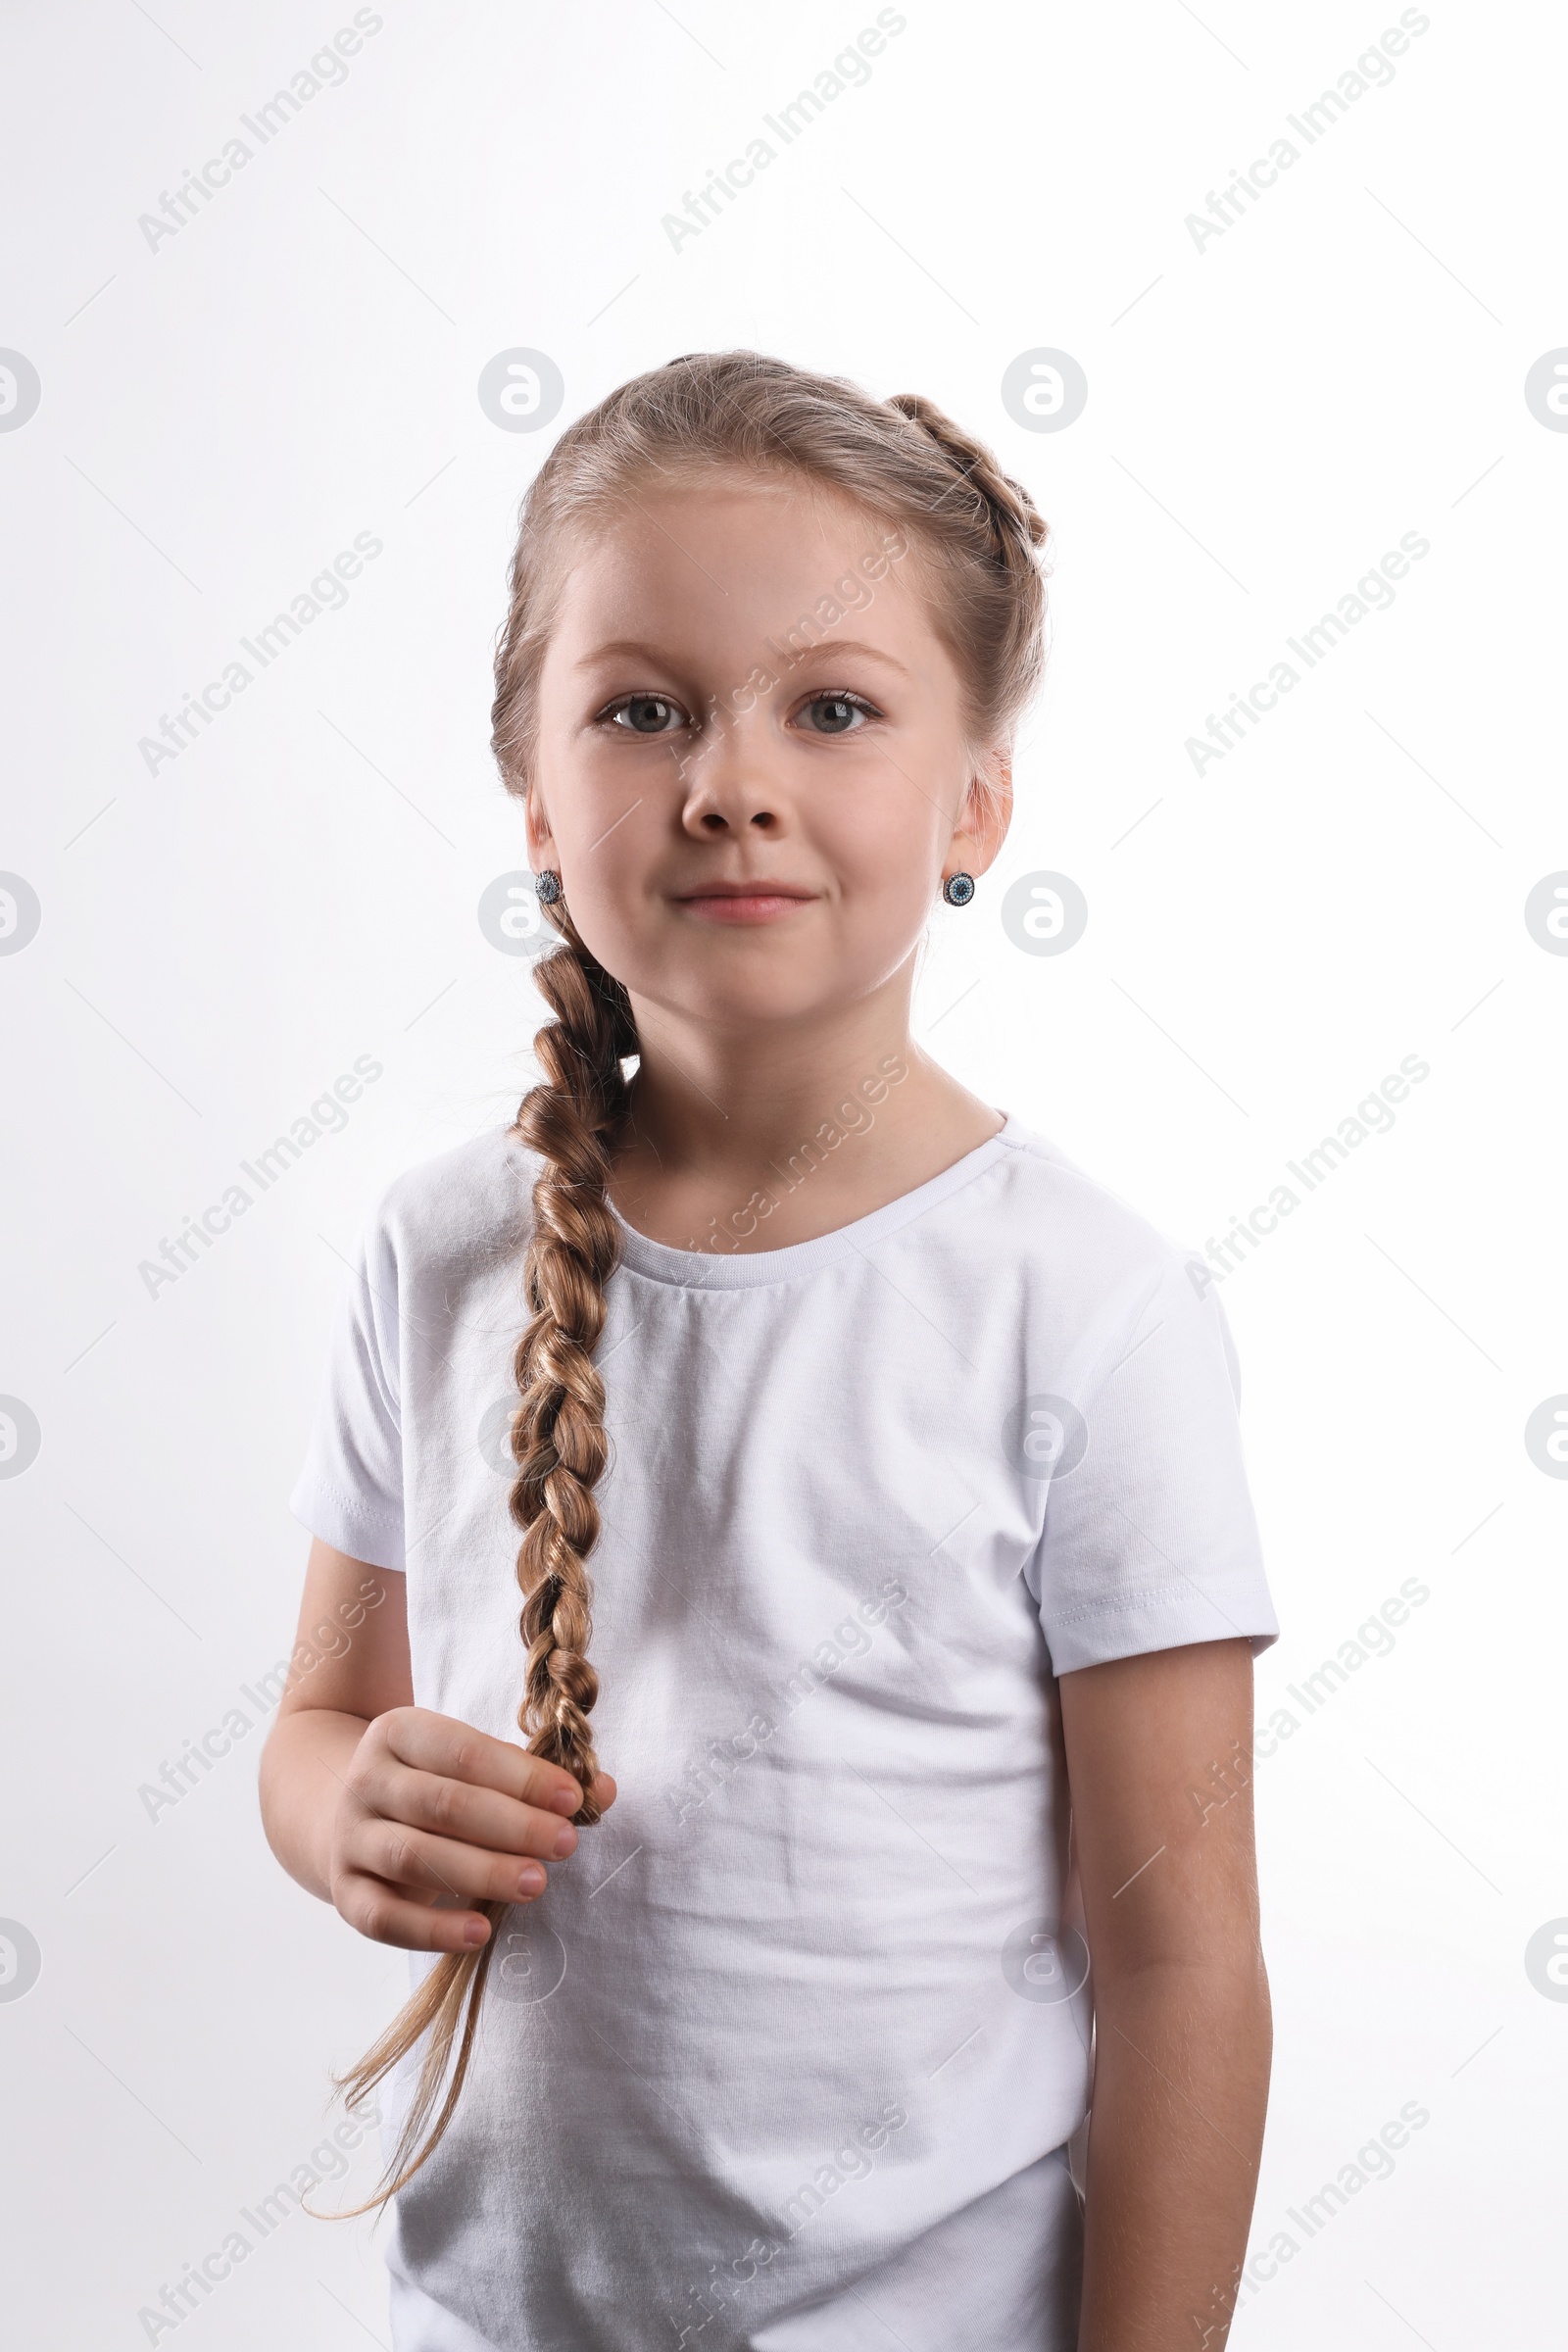 Photo of Little girl with braided hair on white background